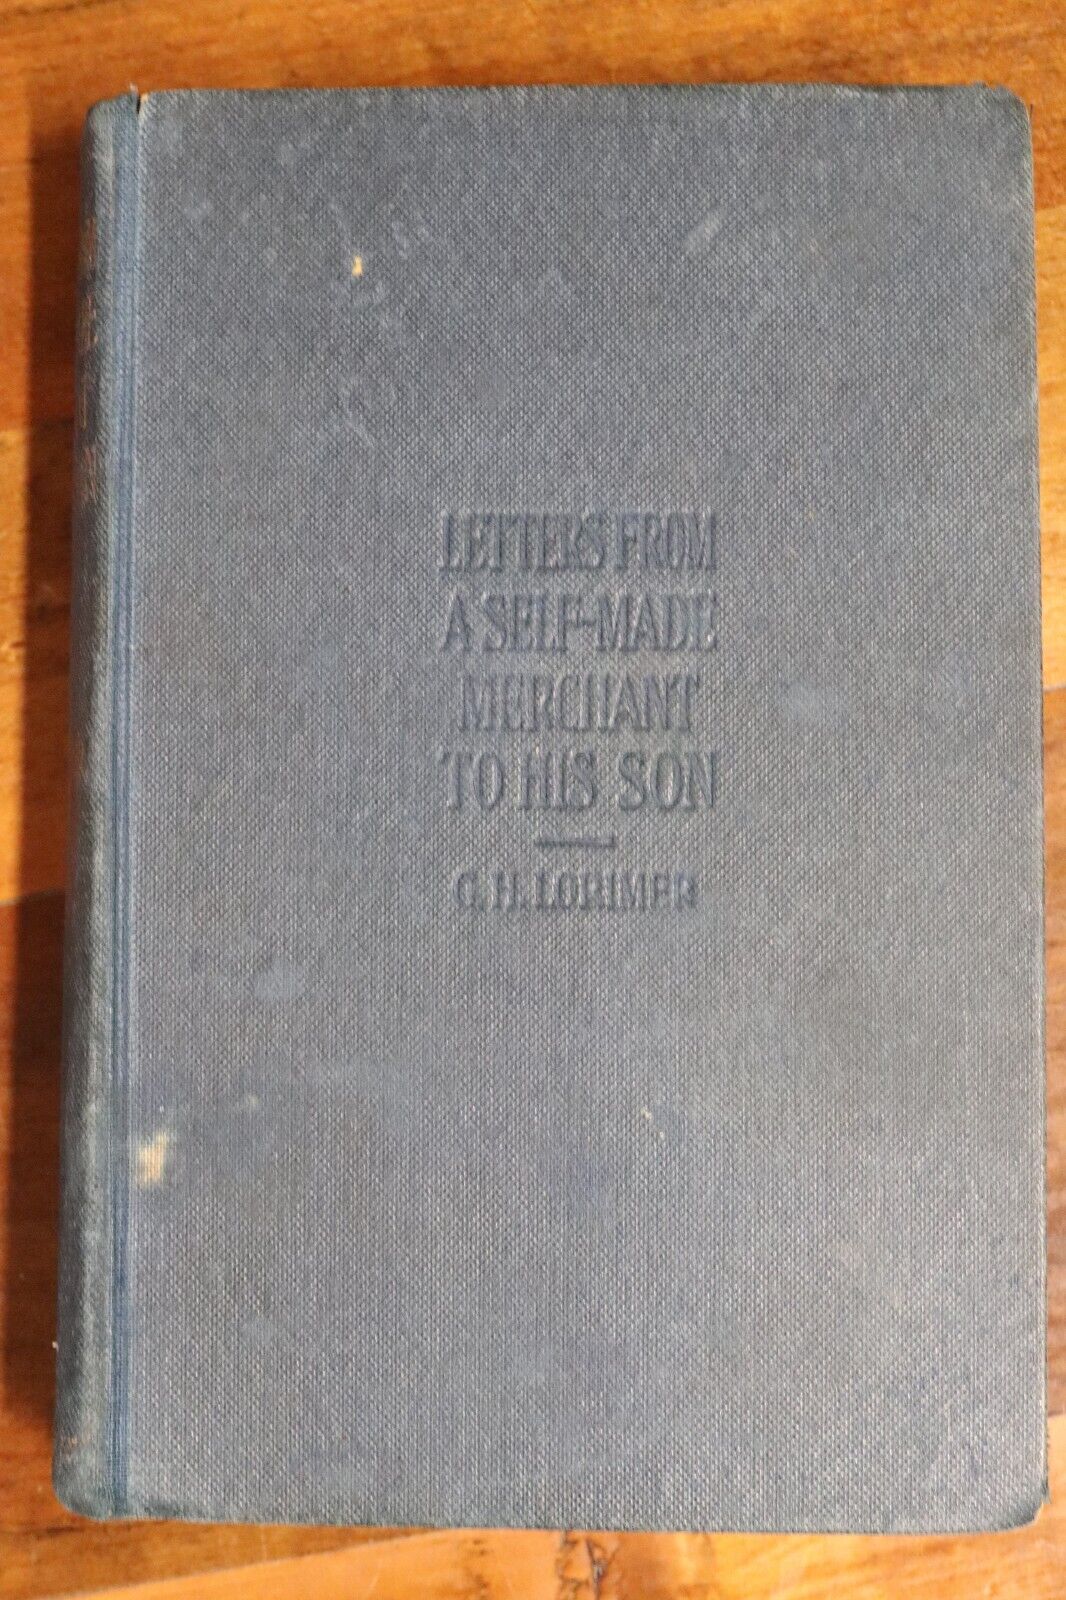 1903 Letters From A Self-Made Merchant To His Son Antique US History Book